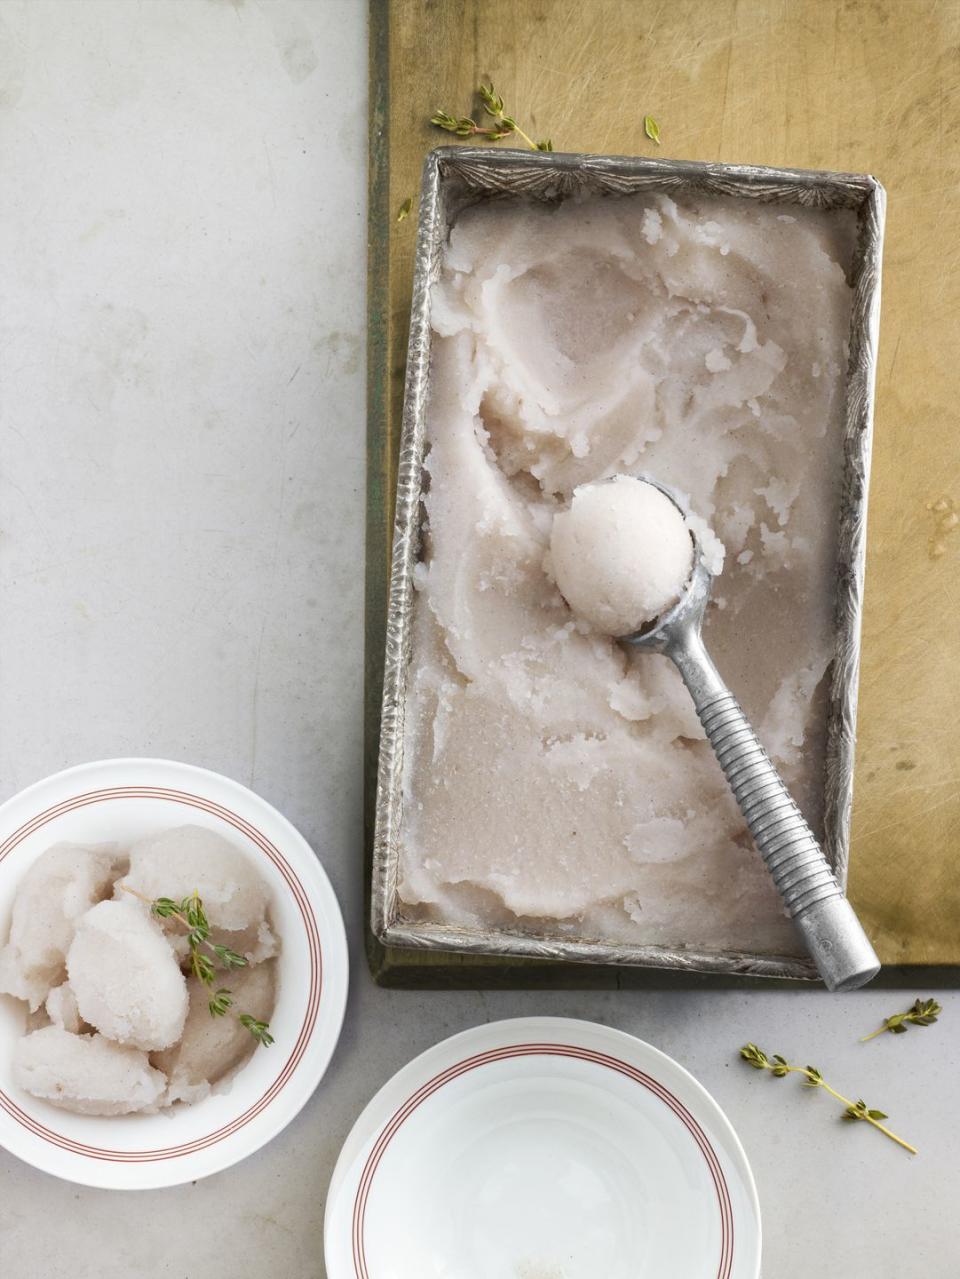 Asian-Pear Sorbet with Thyme